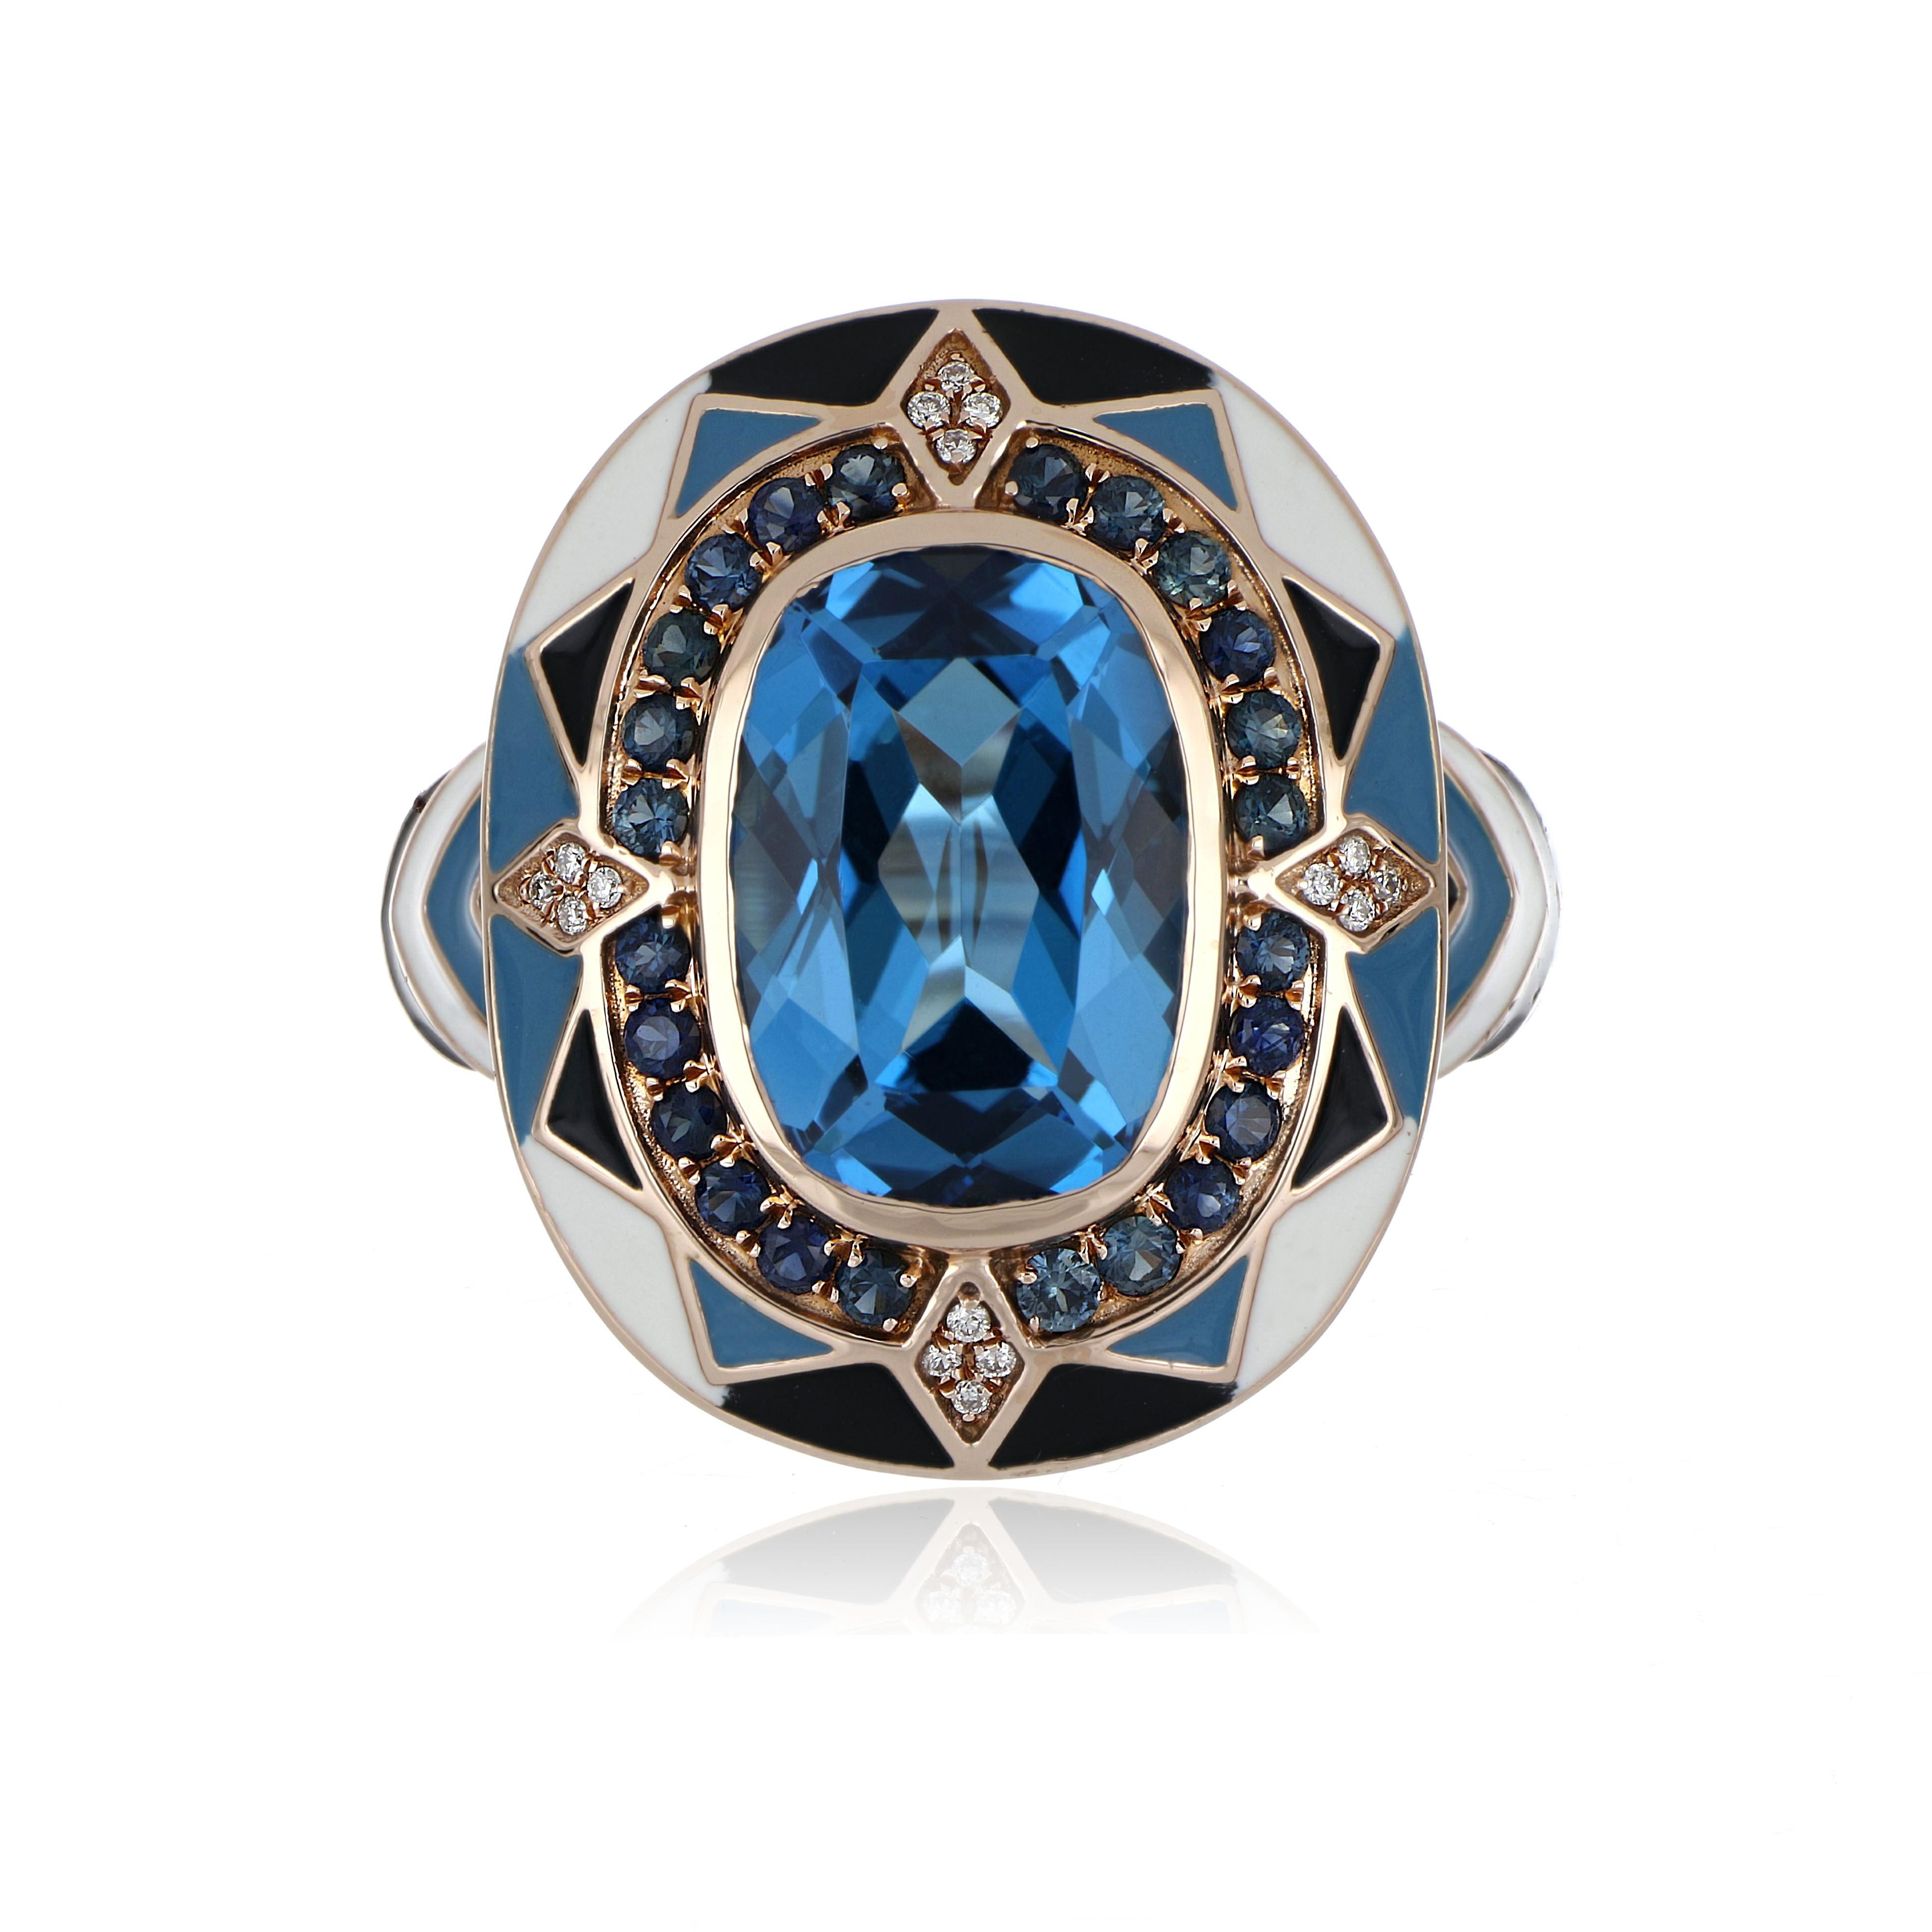 Elegant and exquisite Enamel Cocktail 14 K Ring, center set with 6.14 Cts. Cushion Cut vibrant Swiss Blue Topaz, surrounded by Blue Sapphire Halo 0.48 Cts. accented with Diamonds, weighing approx. 0.05 Cts. Beautifully Hand crafted in 14 Karat Rose